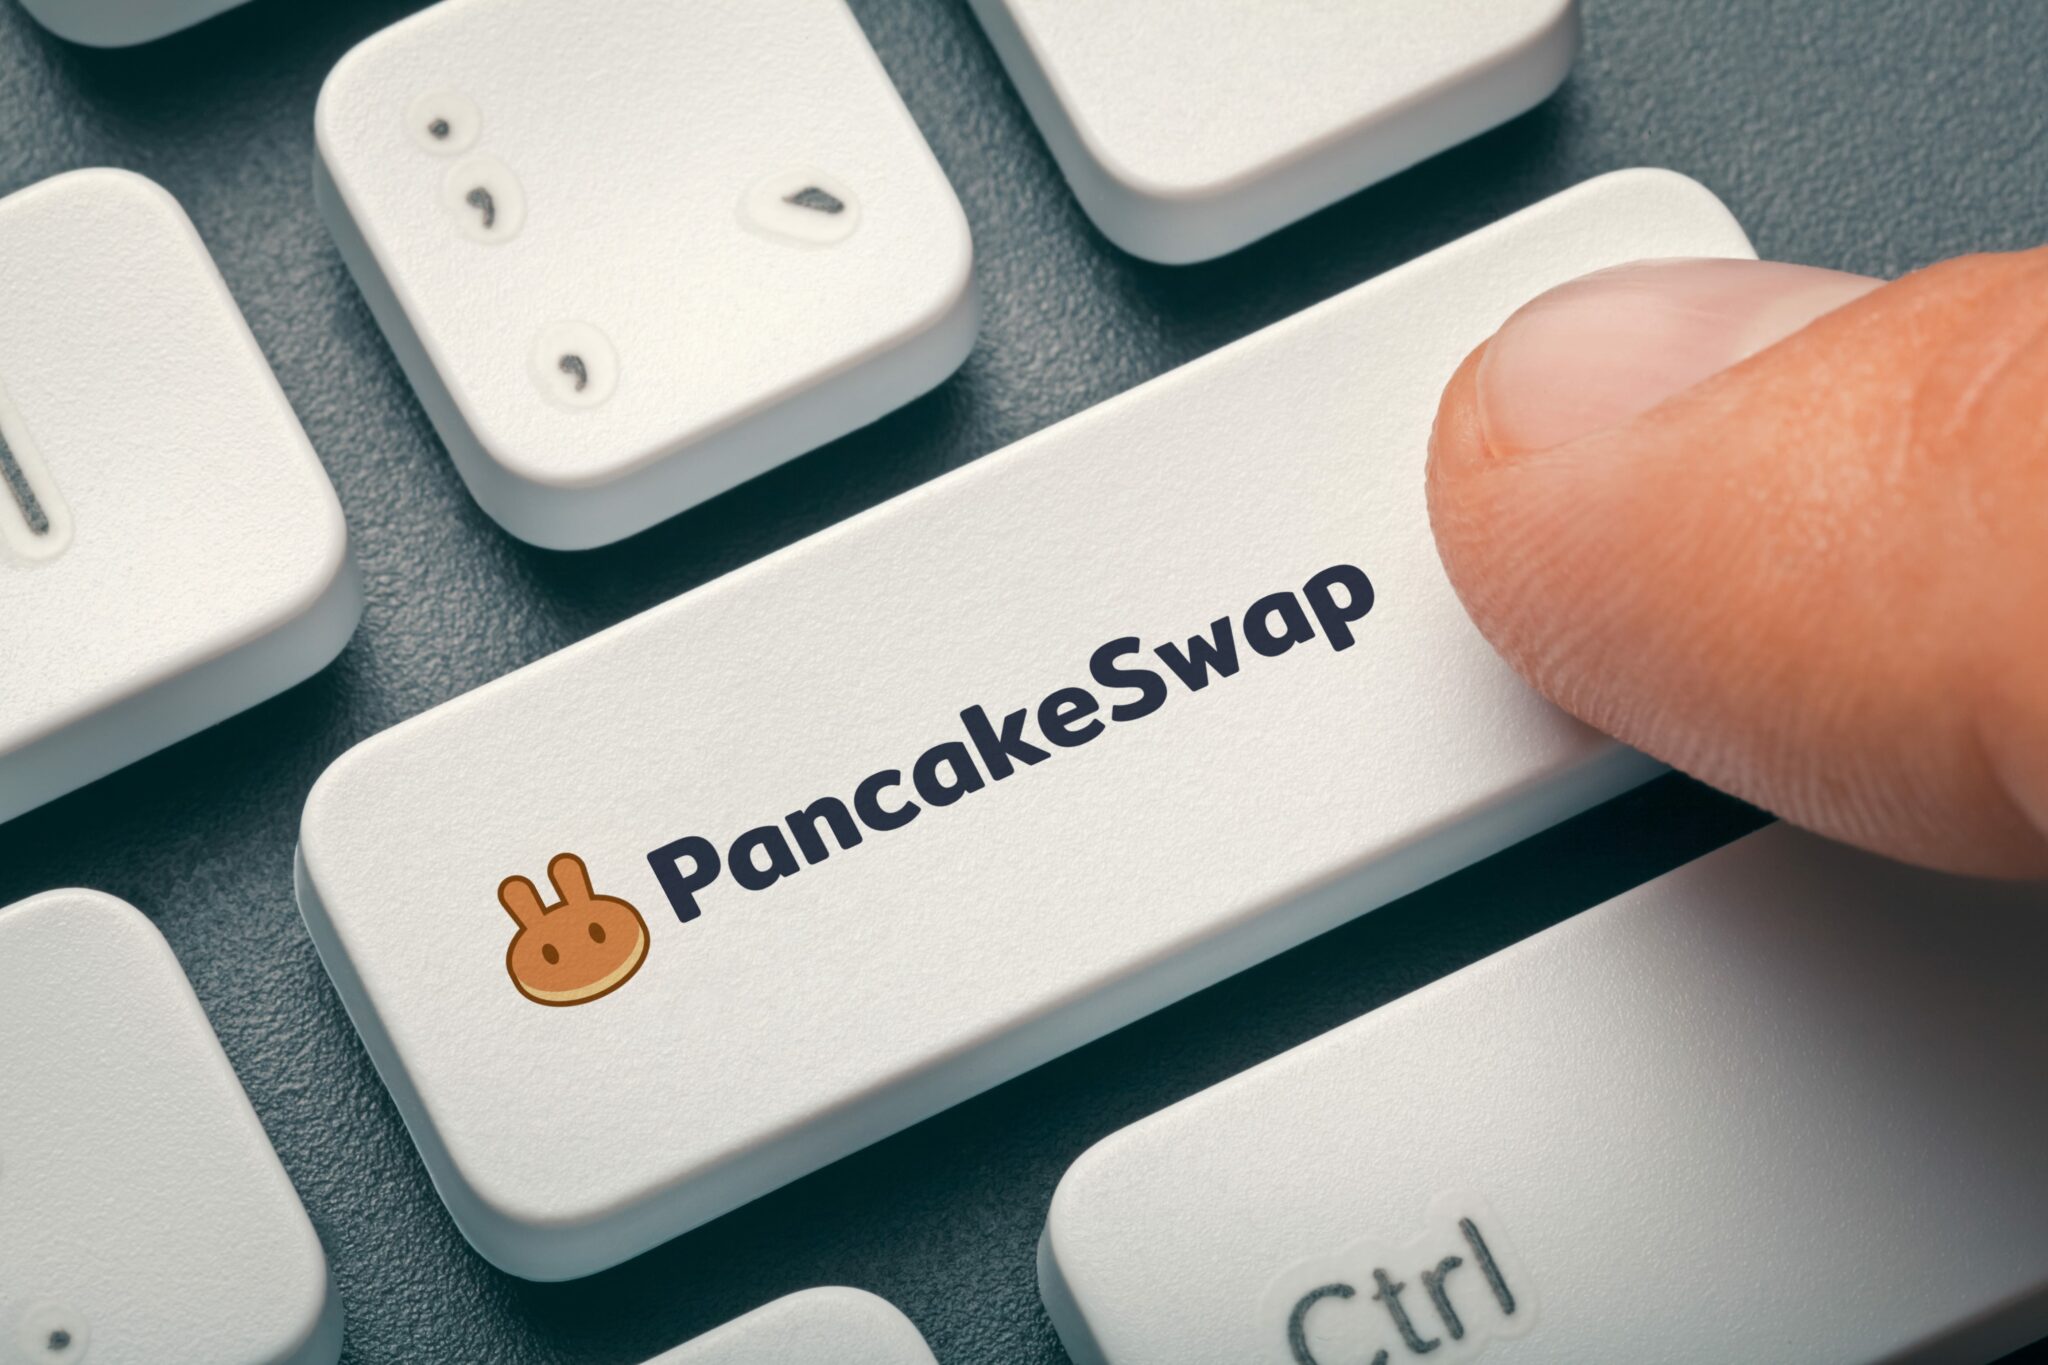 A Brief Guide on PancakeSwap: How Does It Generate Revenue?